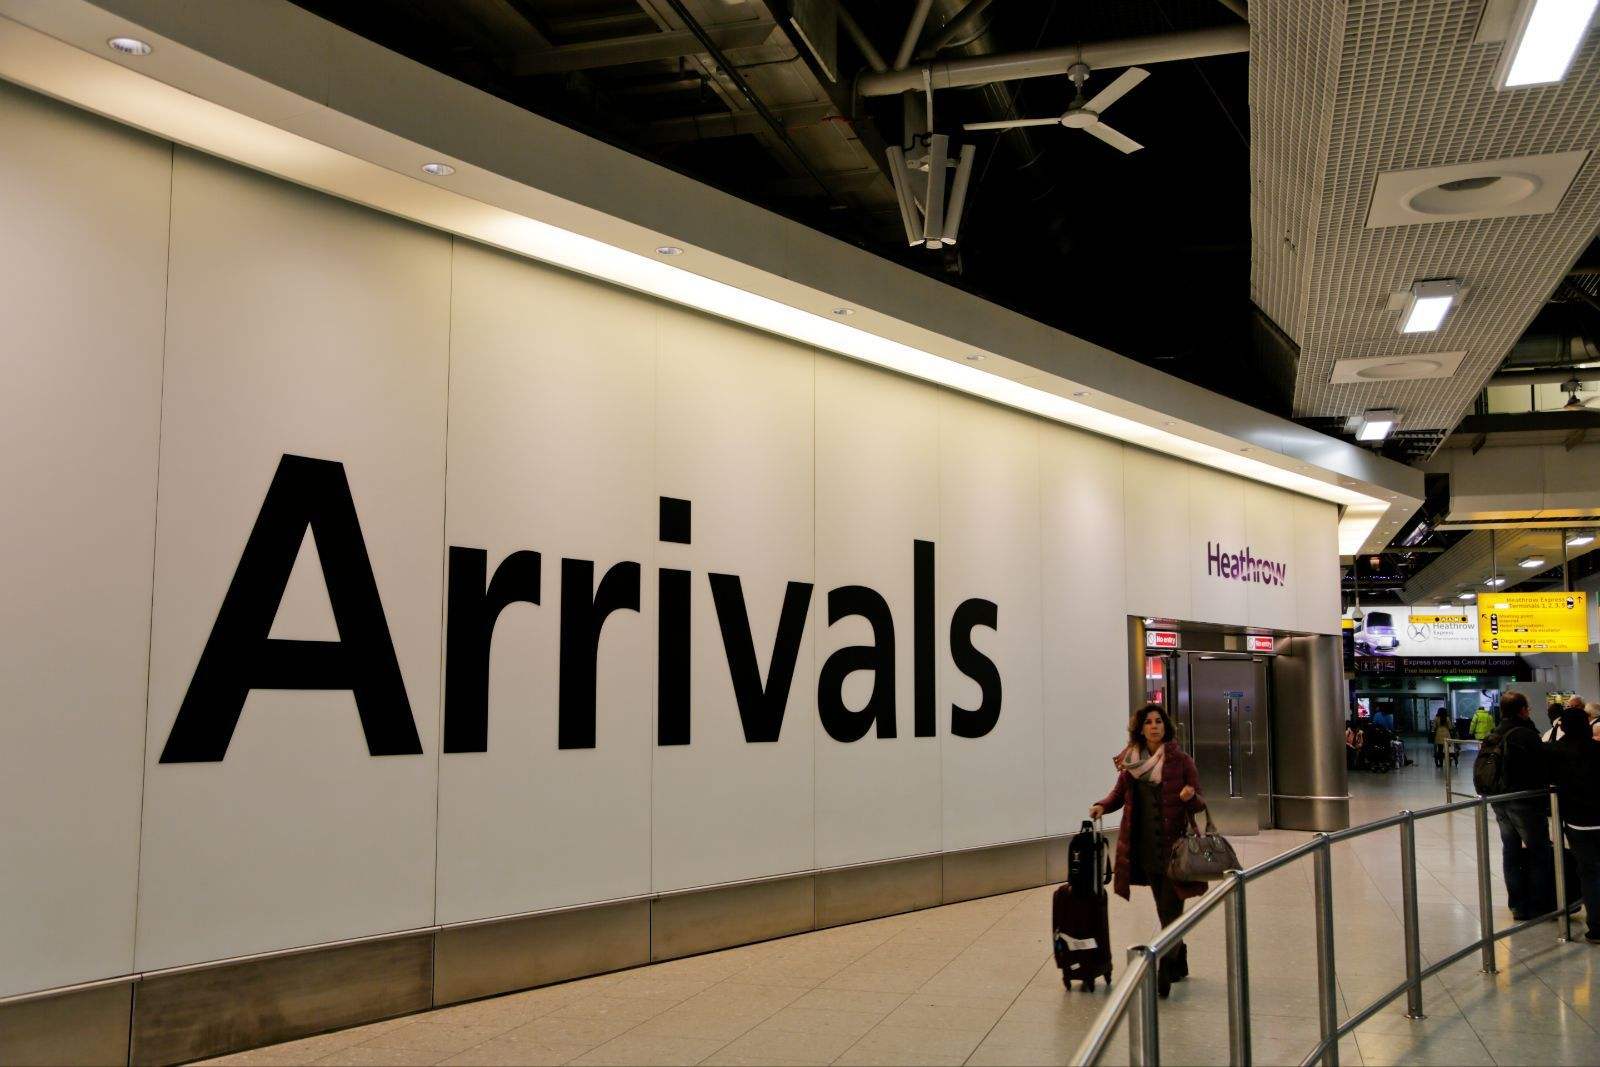 Manchester Airport passenger numbers take off